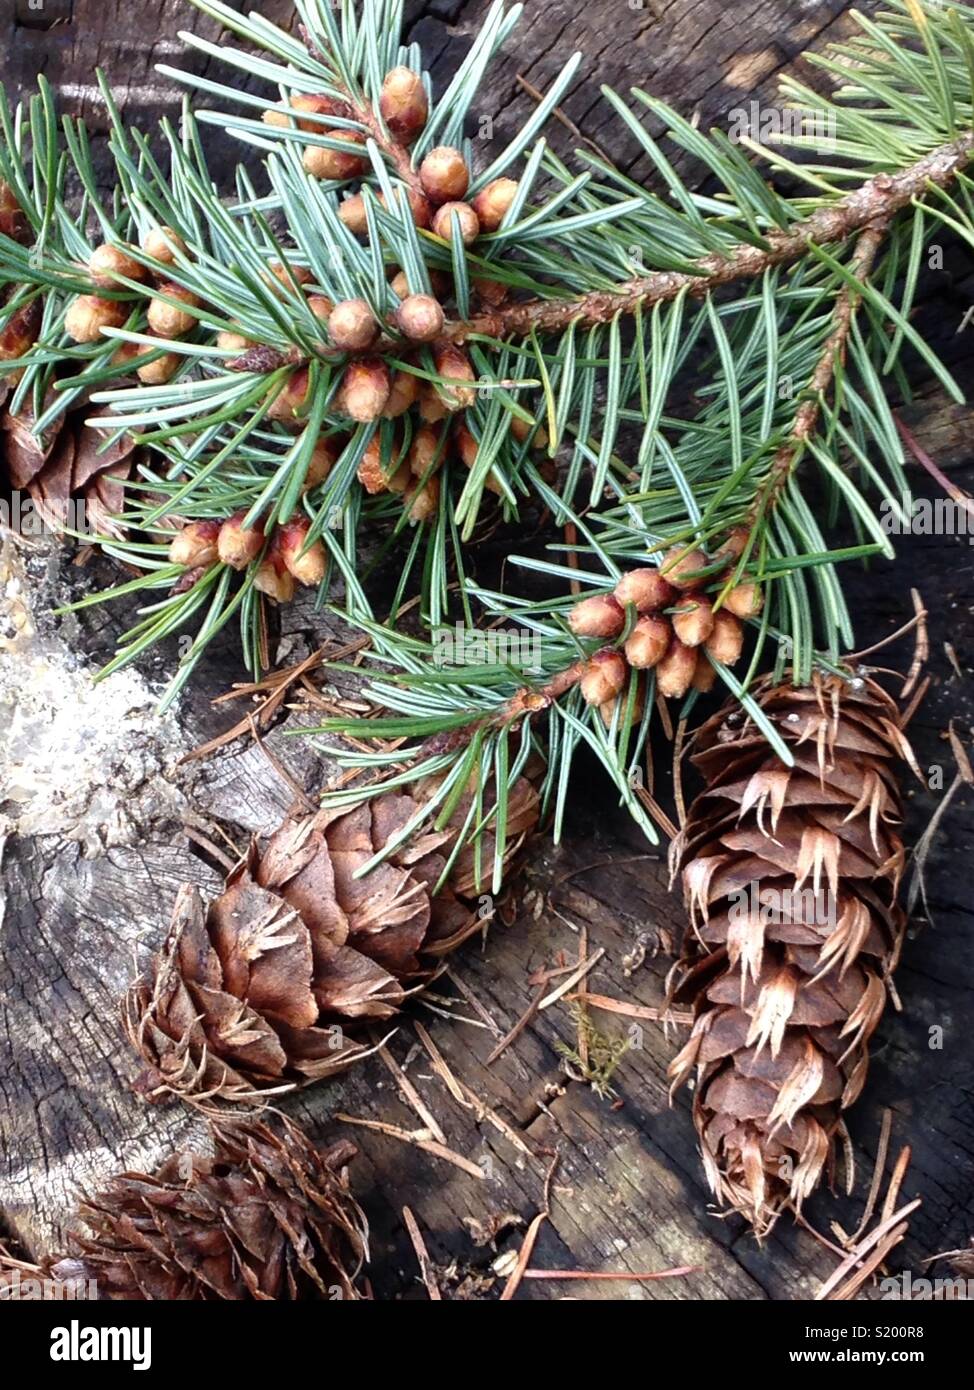 Variety of pine branch, pine cones, and spring buds. Stock Photo